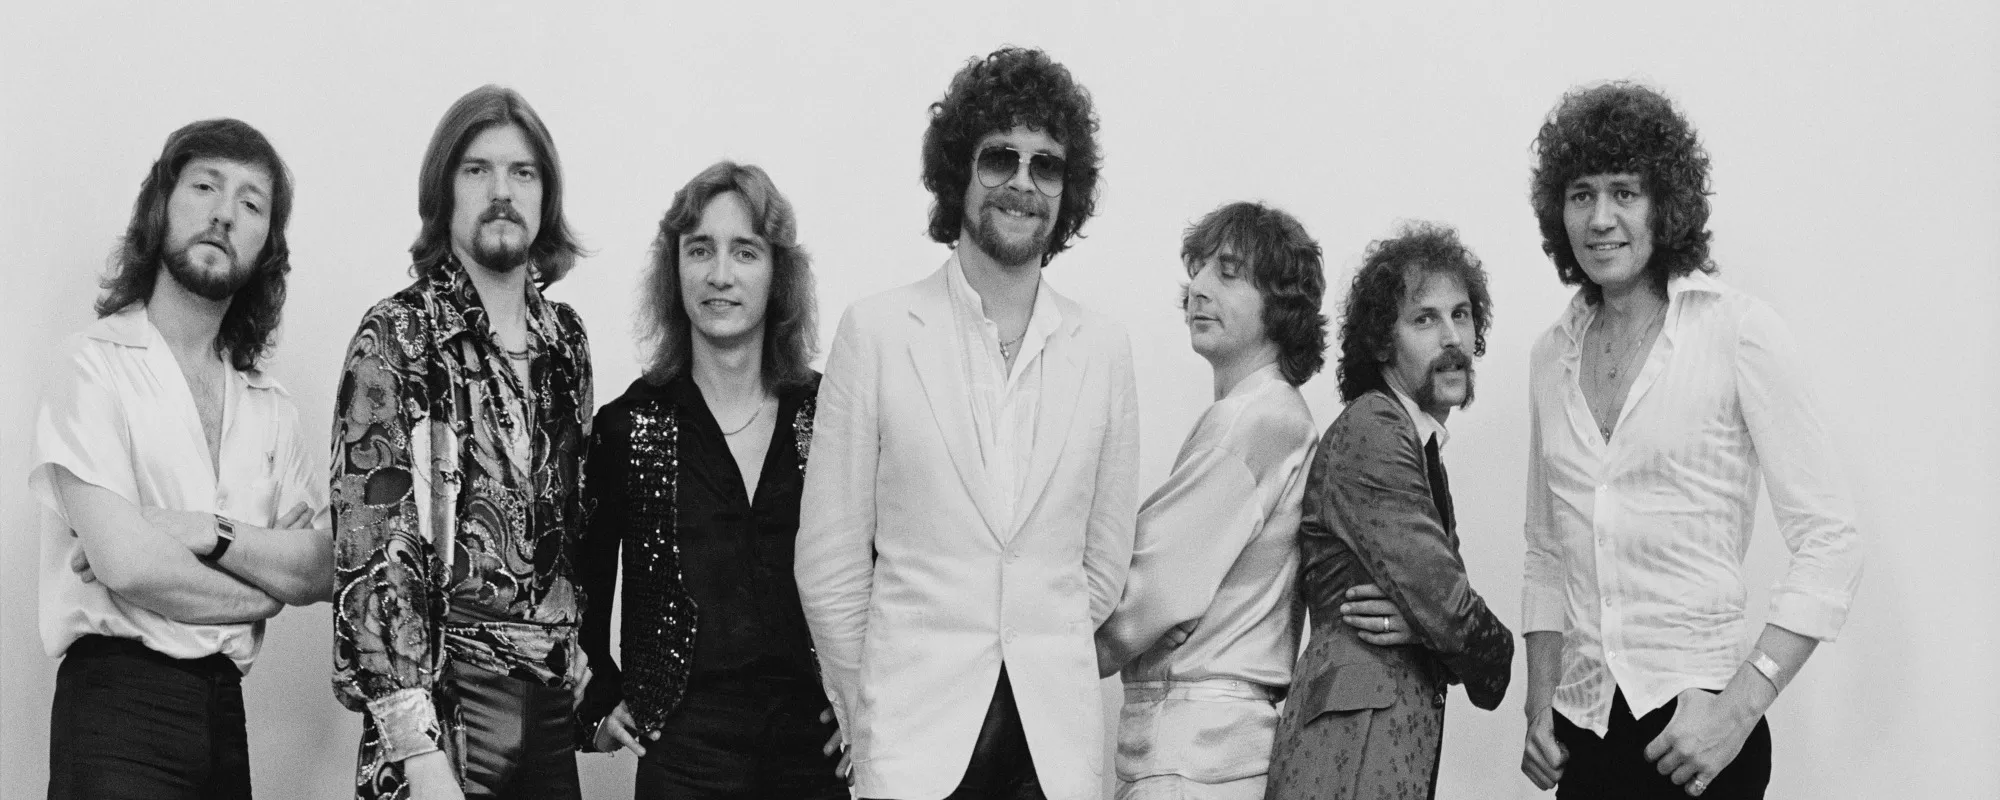 A Deeper Look at the Meaning Behind “Mr. Blue Sky,” Electric Light Orchestra